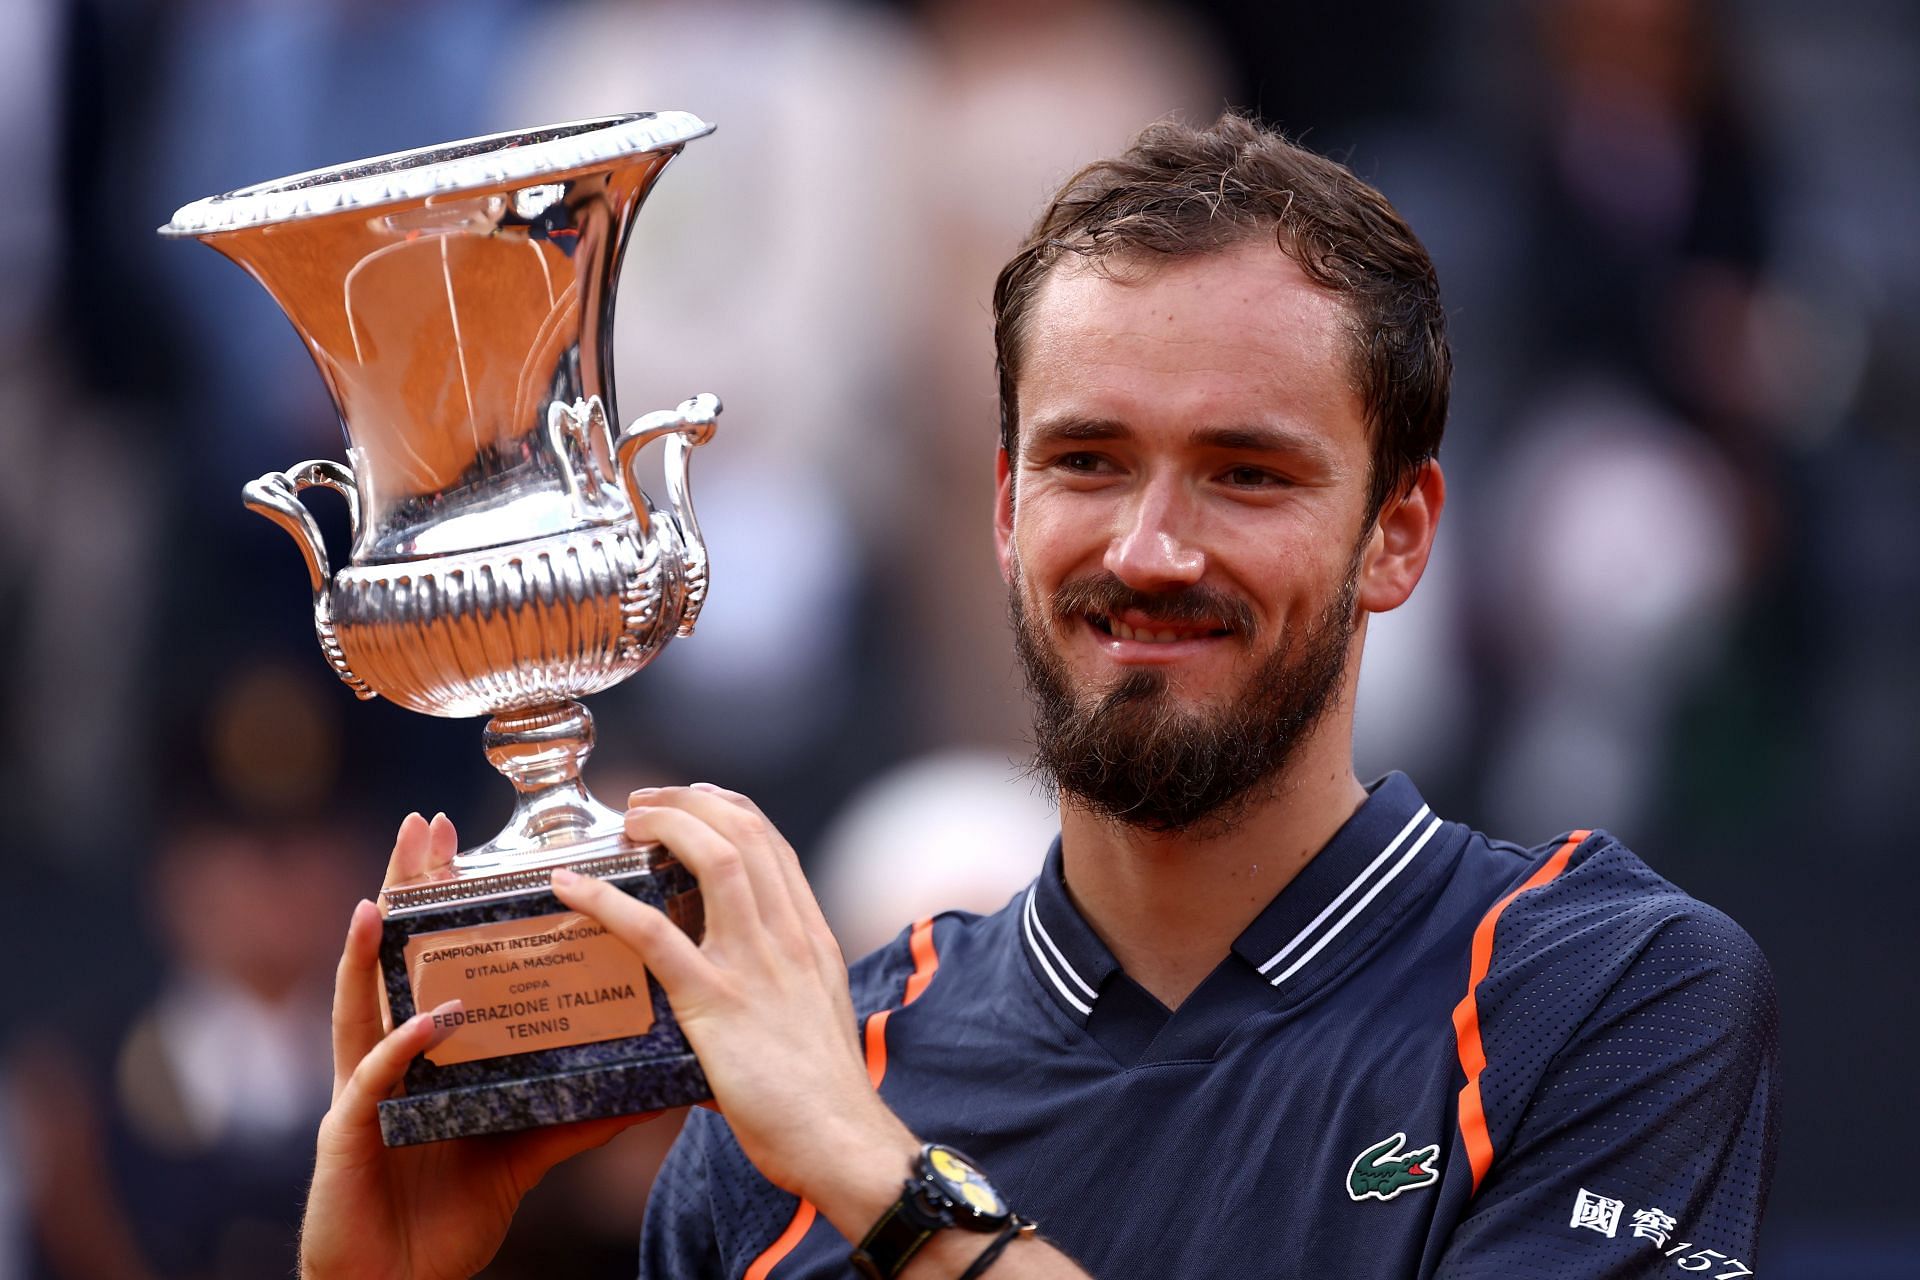 Daniil Medvedev has emerged as one of the title favorites for the French Open.